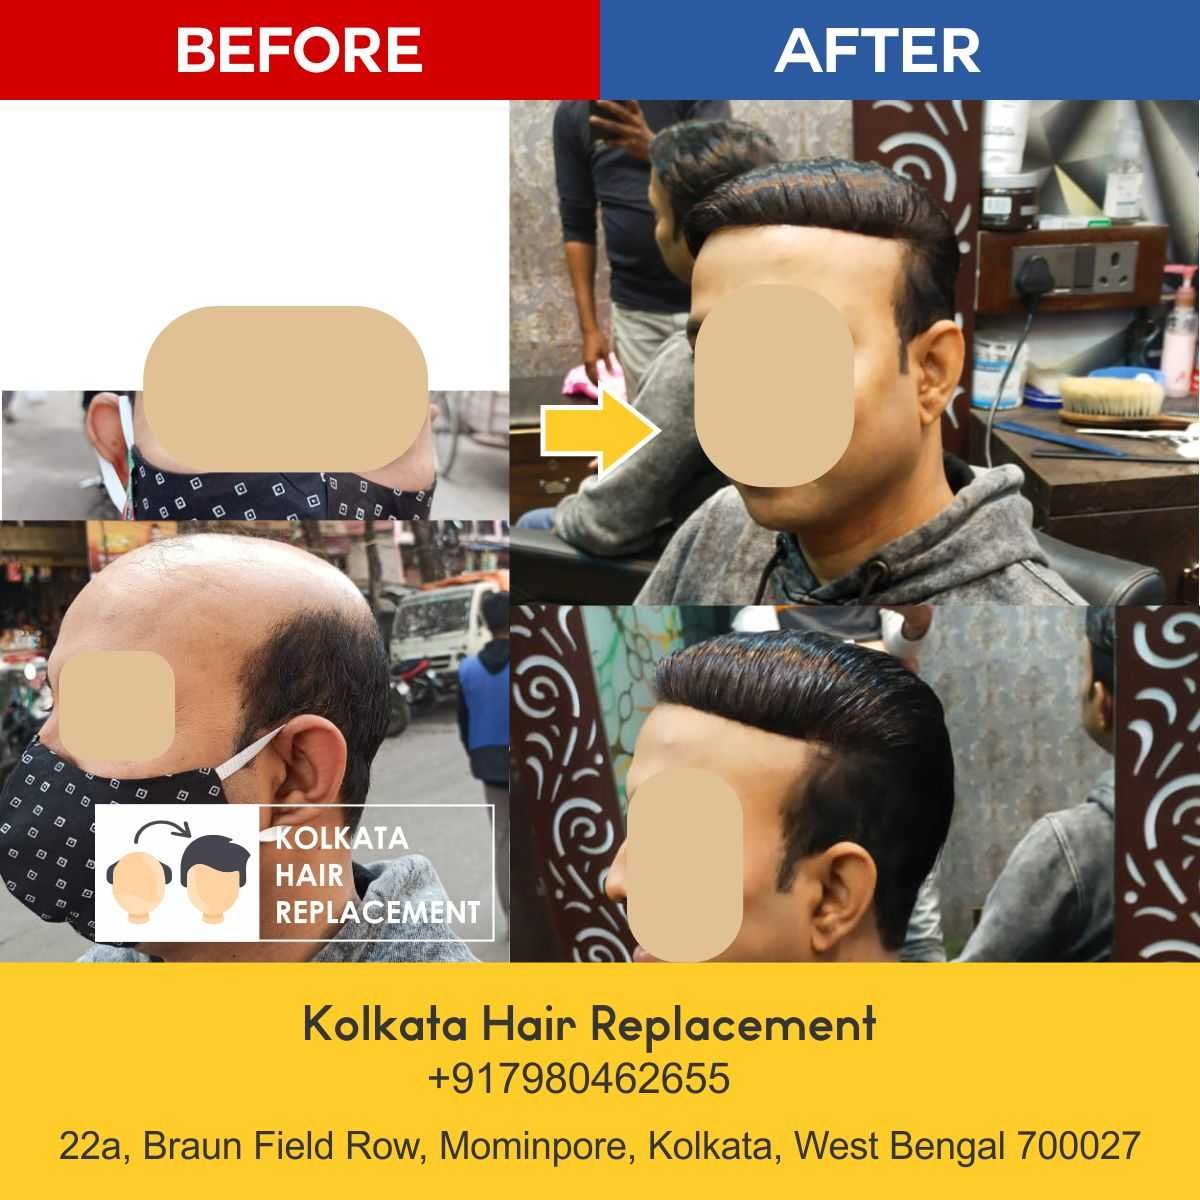 men-hair-wig-patch-kolkata-hair-replacement-before-after-08